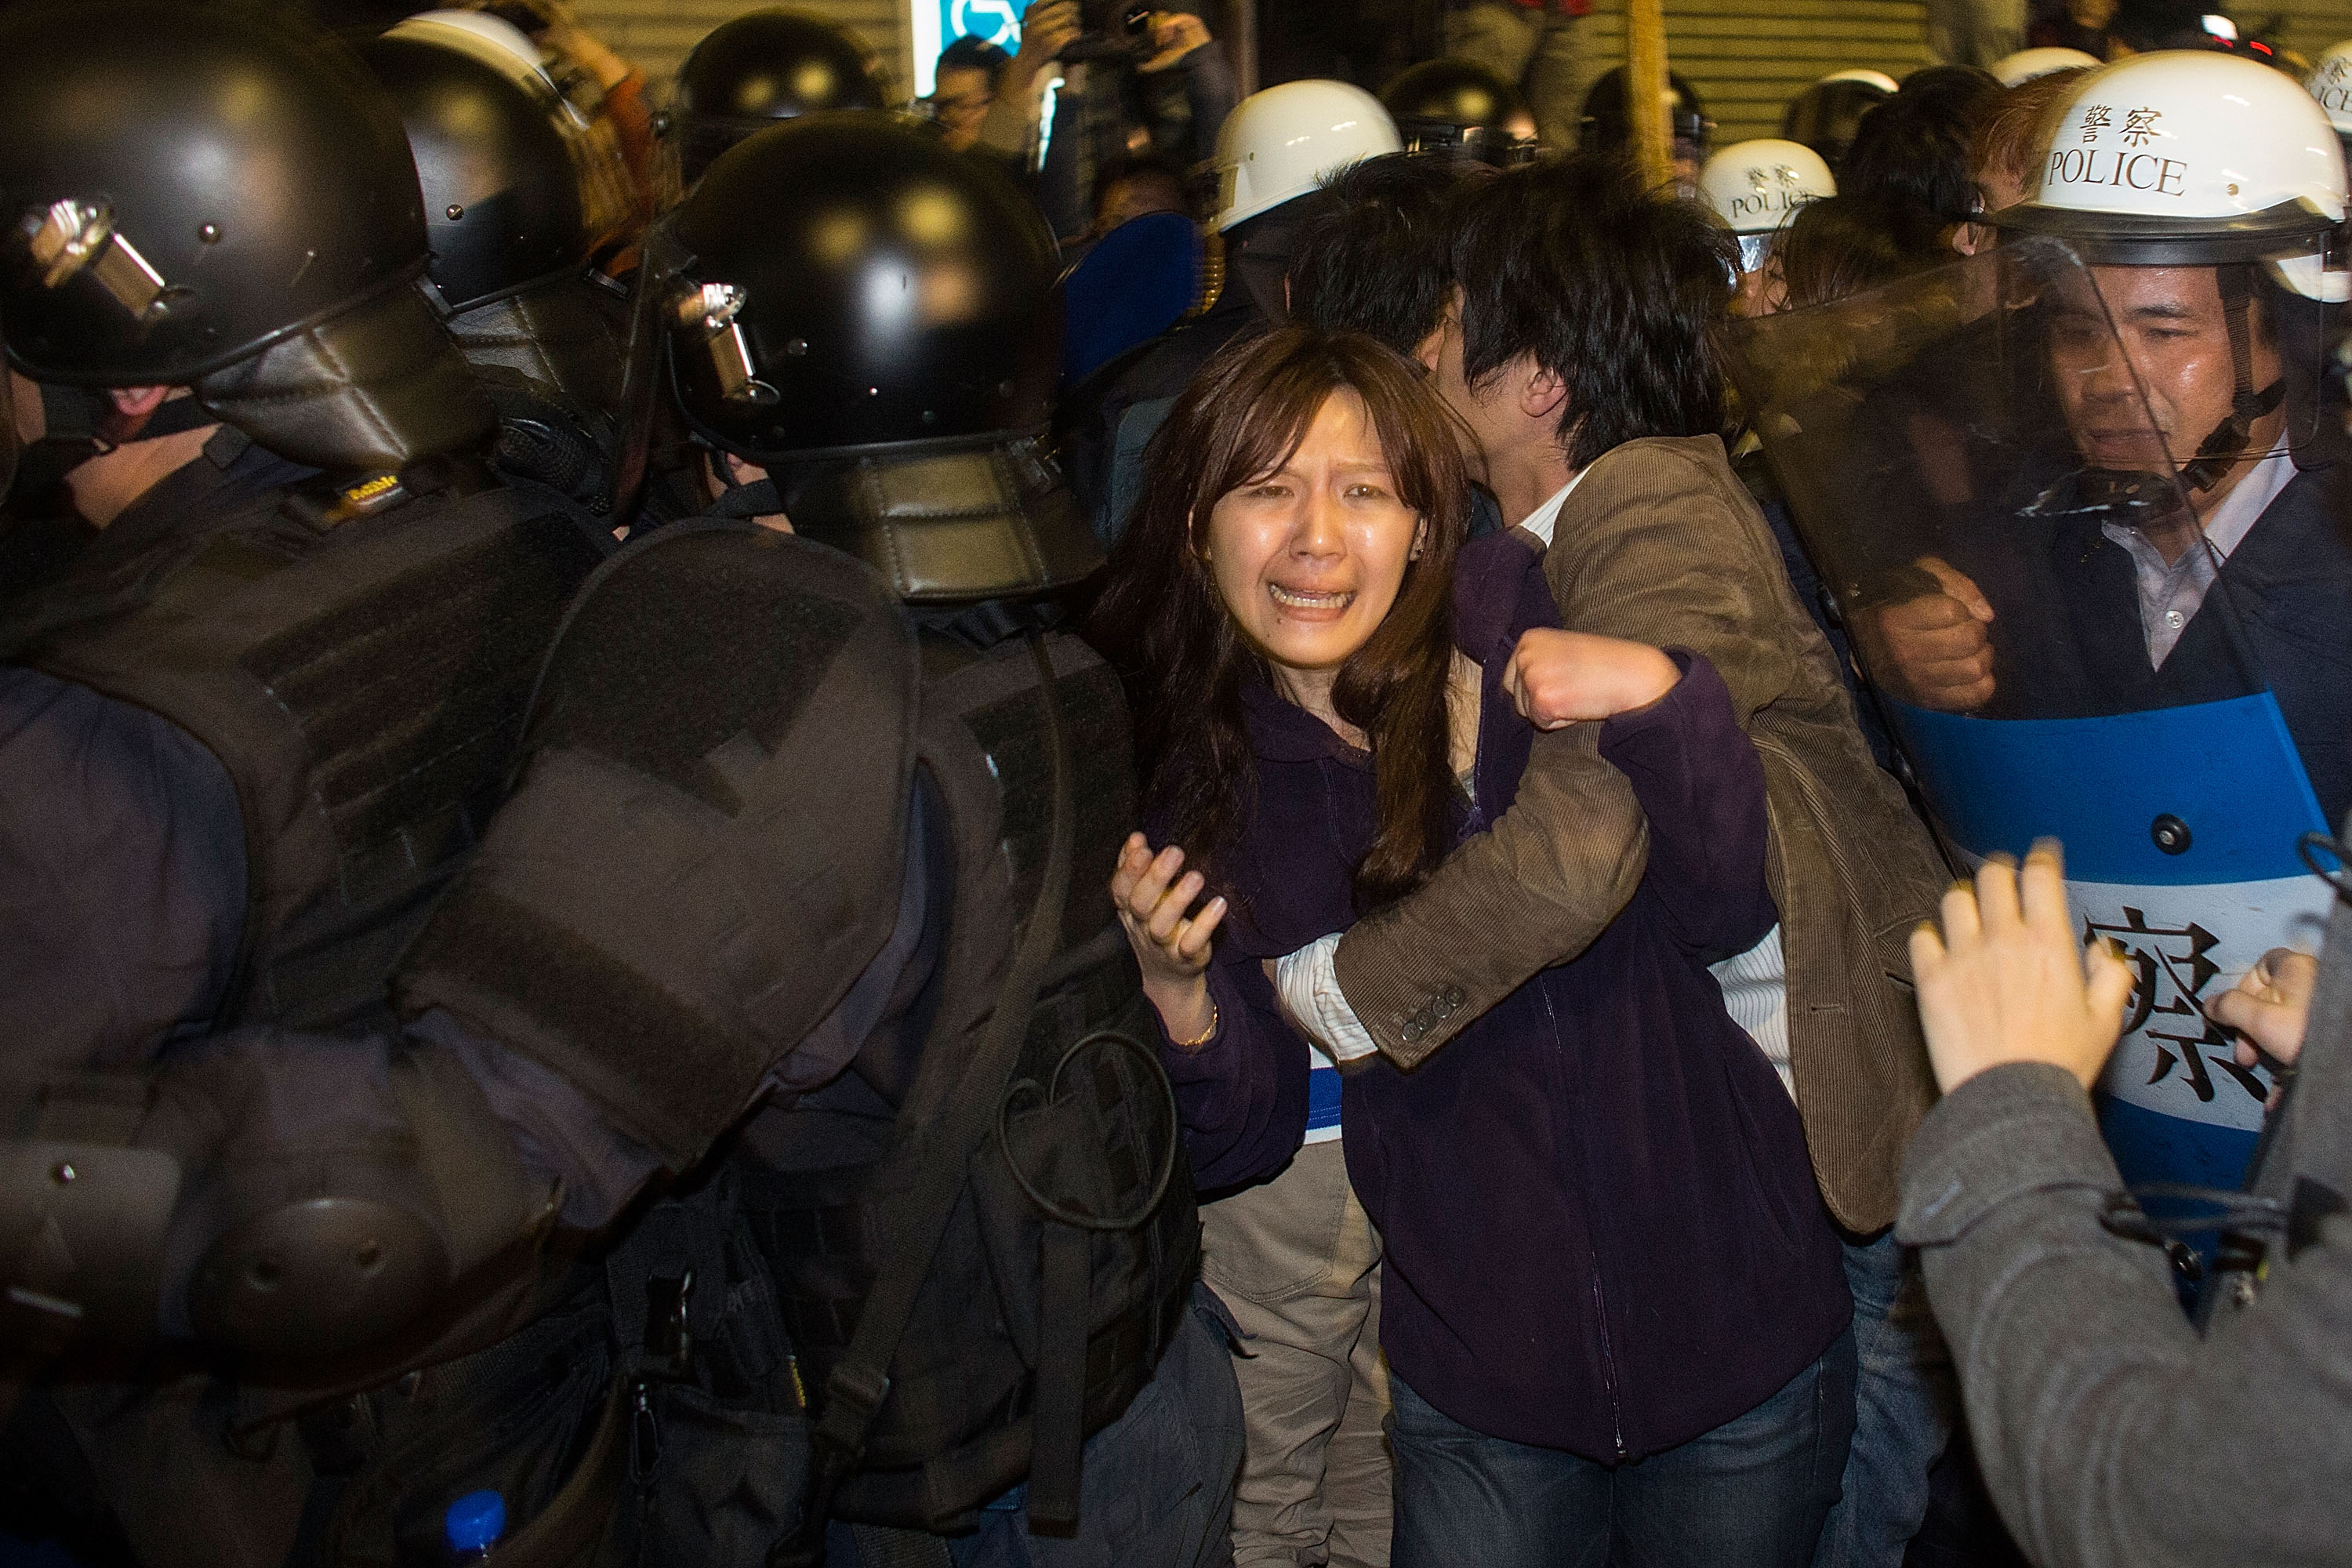 Riot police clash with student protesters outside Taiwan's cabinet offices in Taipei on March 24, 2014. Clashes erupted after Taiwan's President refused to scrap a contentious trade agreement with China and denounced the 